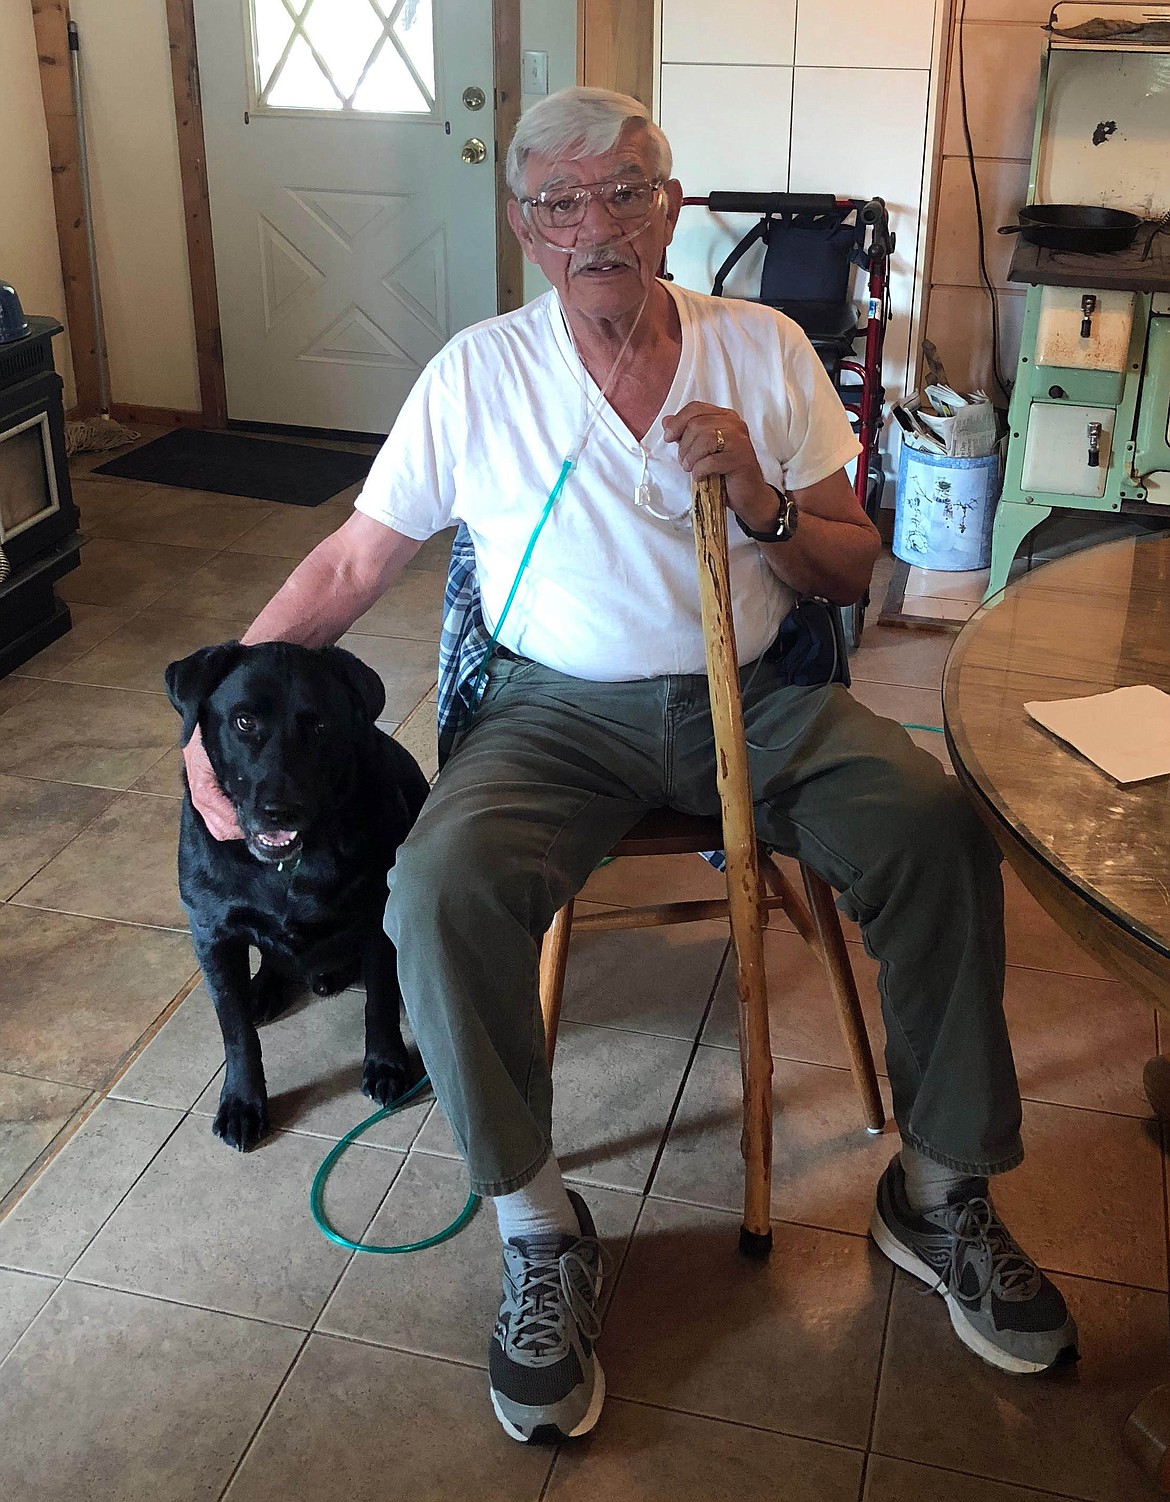 Photo by Josh McDonald
Richard Gutierrez now, sitting at his home with his dog, Tucker. Tucker can tell when Richard&#146;s oxygen levels are low and will alert his wife despite never receiving any training to do so.